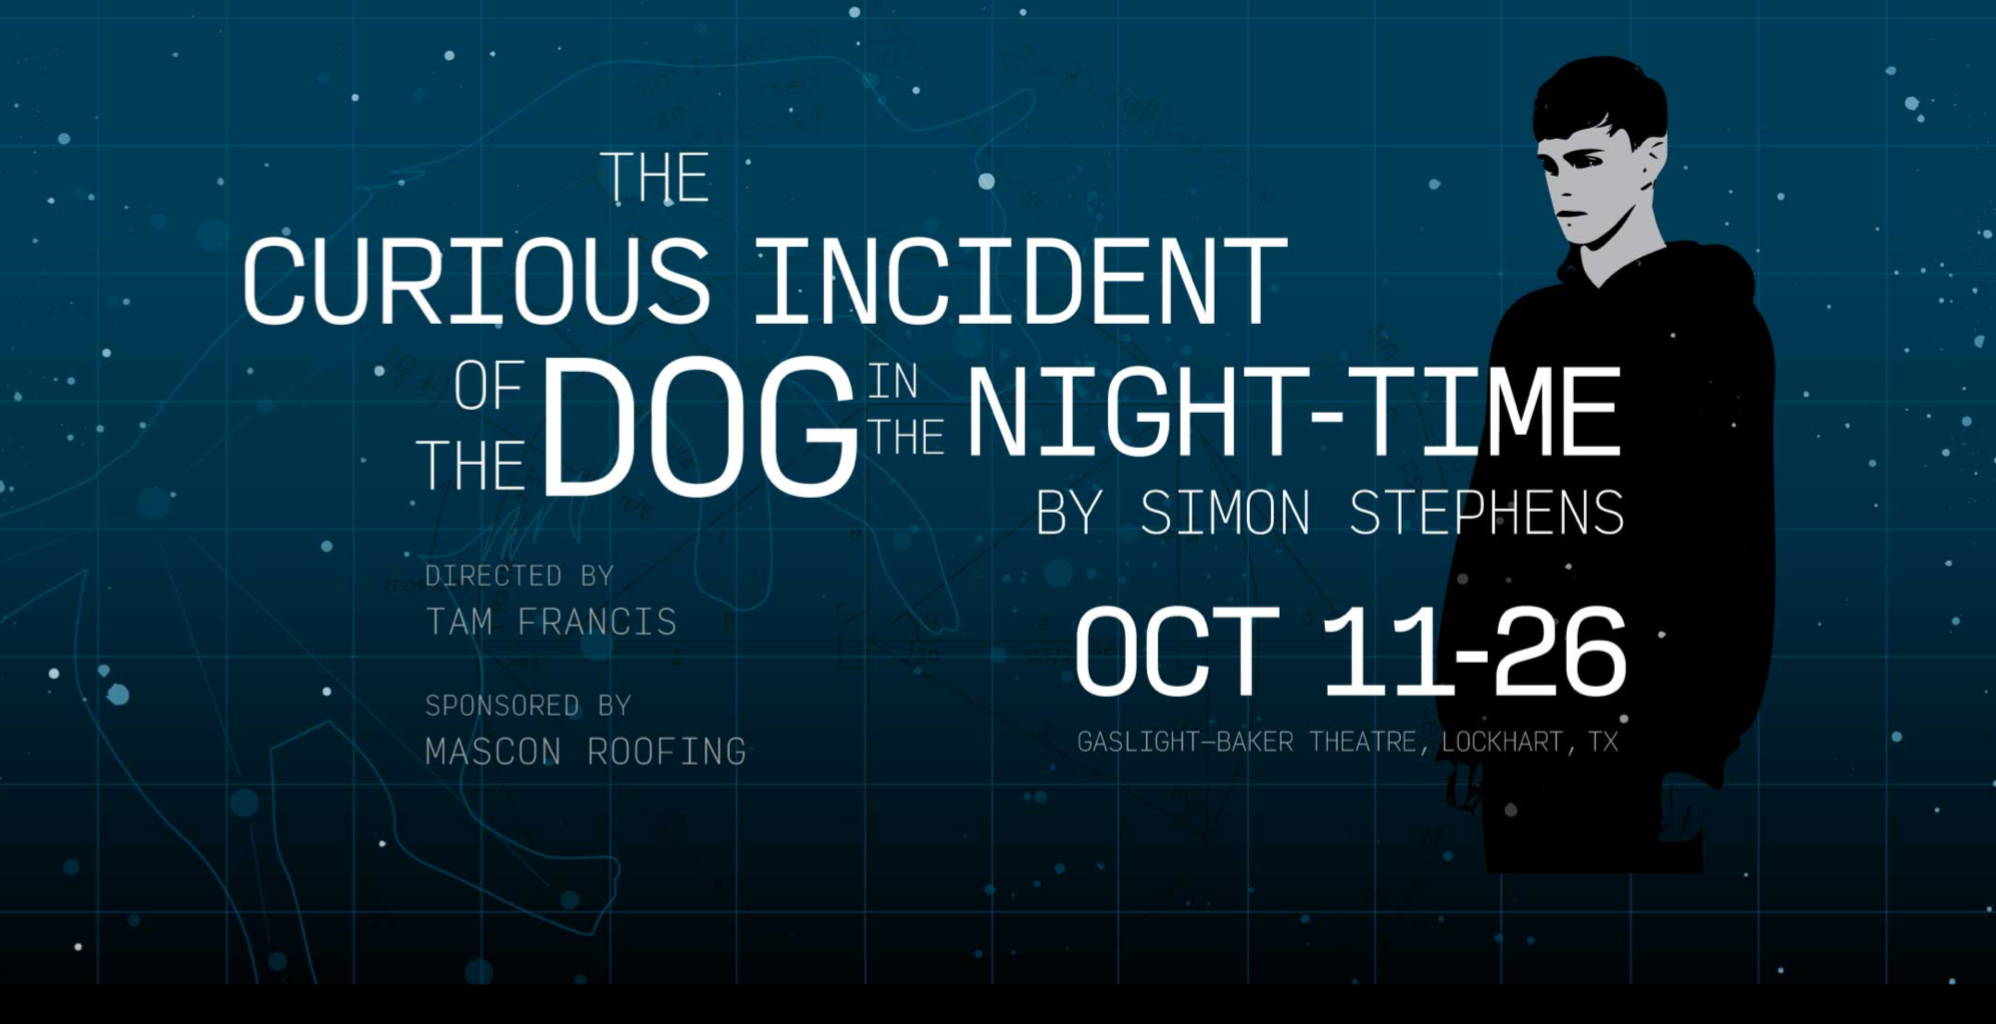 The Curious Incident of the Dog in the Night-Time by Gaslight Baker Theatre